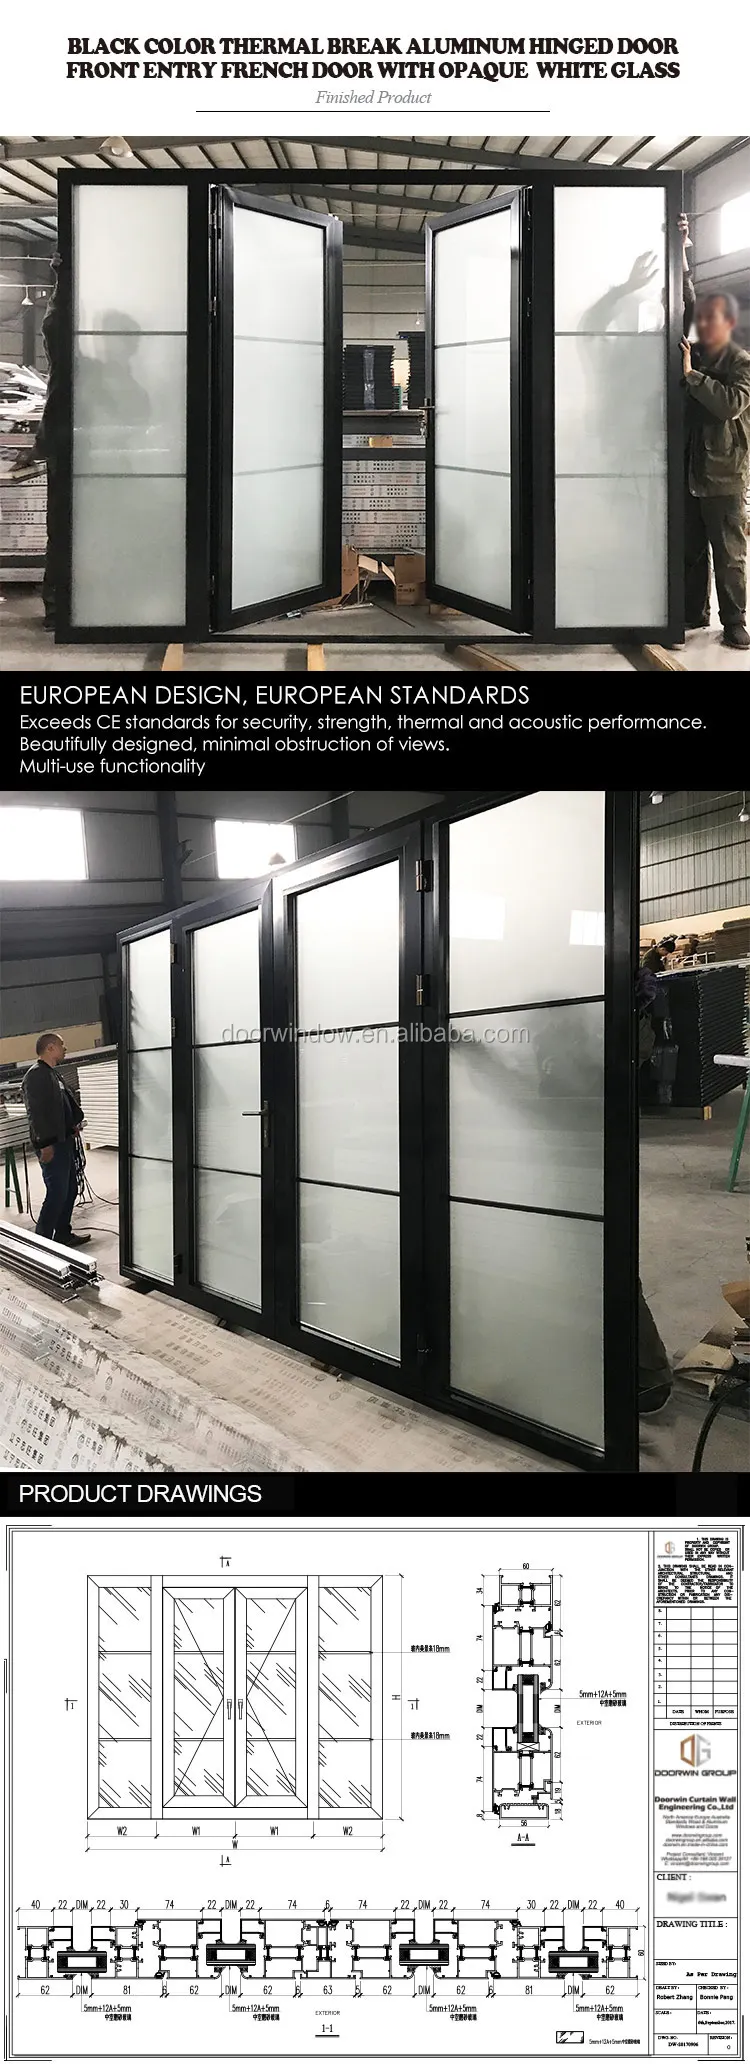 Black powder coated Color frosted tempered glass insert Thermal Break Aluminum hinged French door aluminum profile door